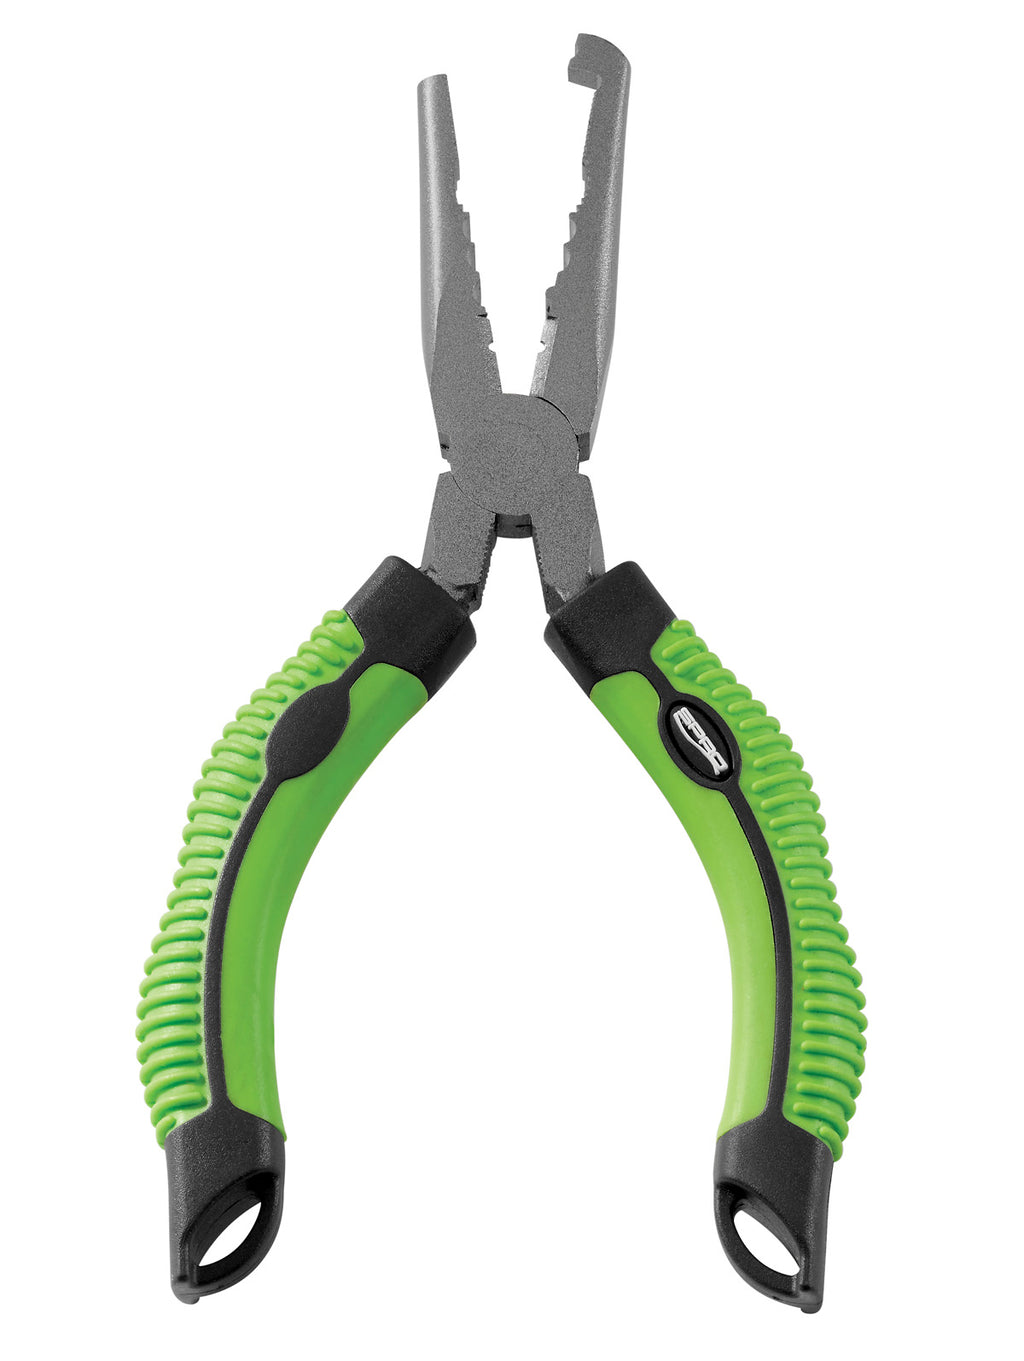  Fitzgerald Split Ring Pliers 6” With Built-In Line